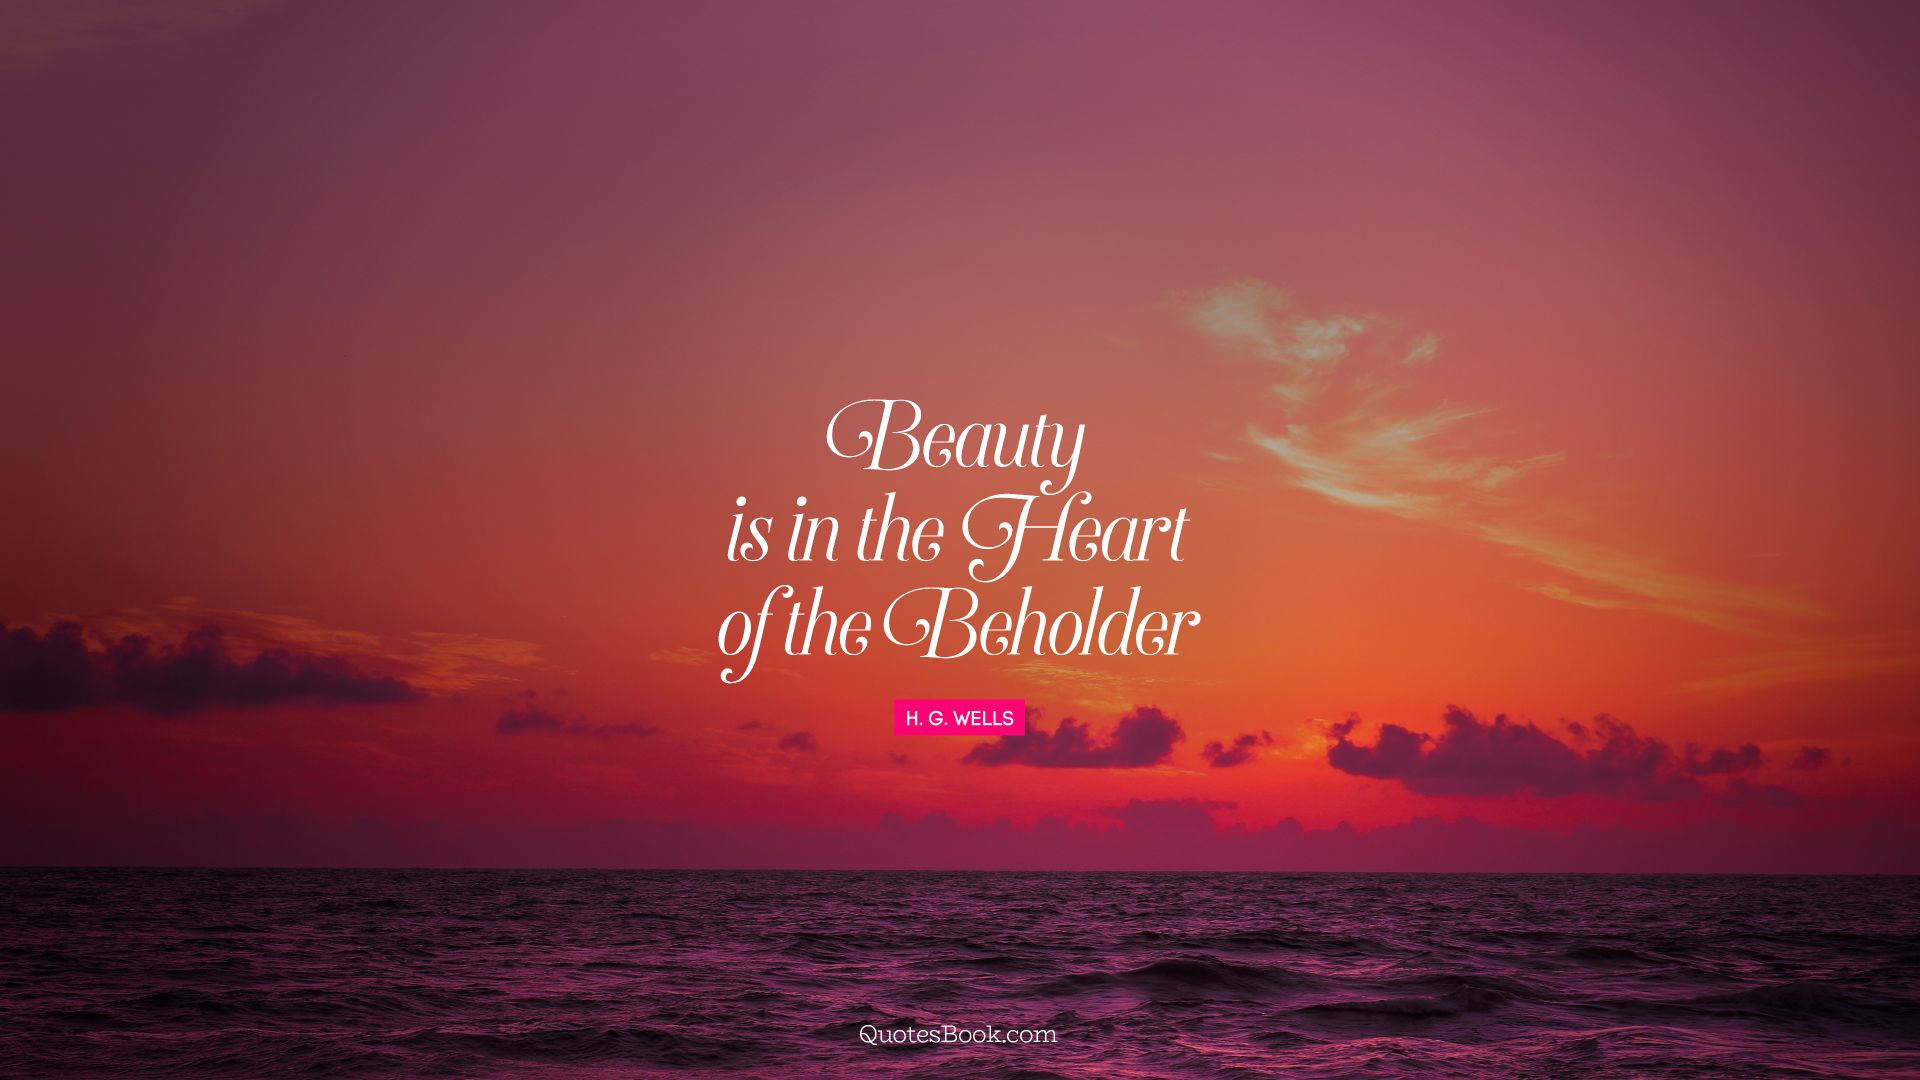 Beauty is in the heart of the beholder. - Quote by H. G. Wells